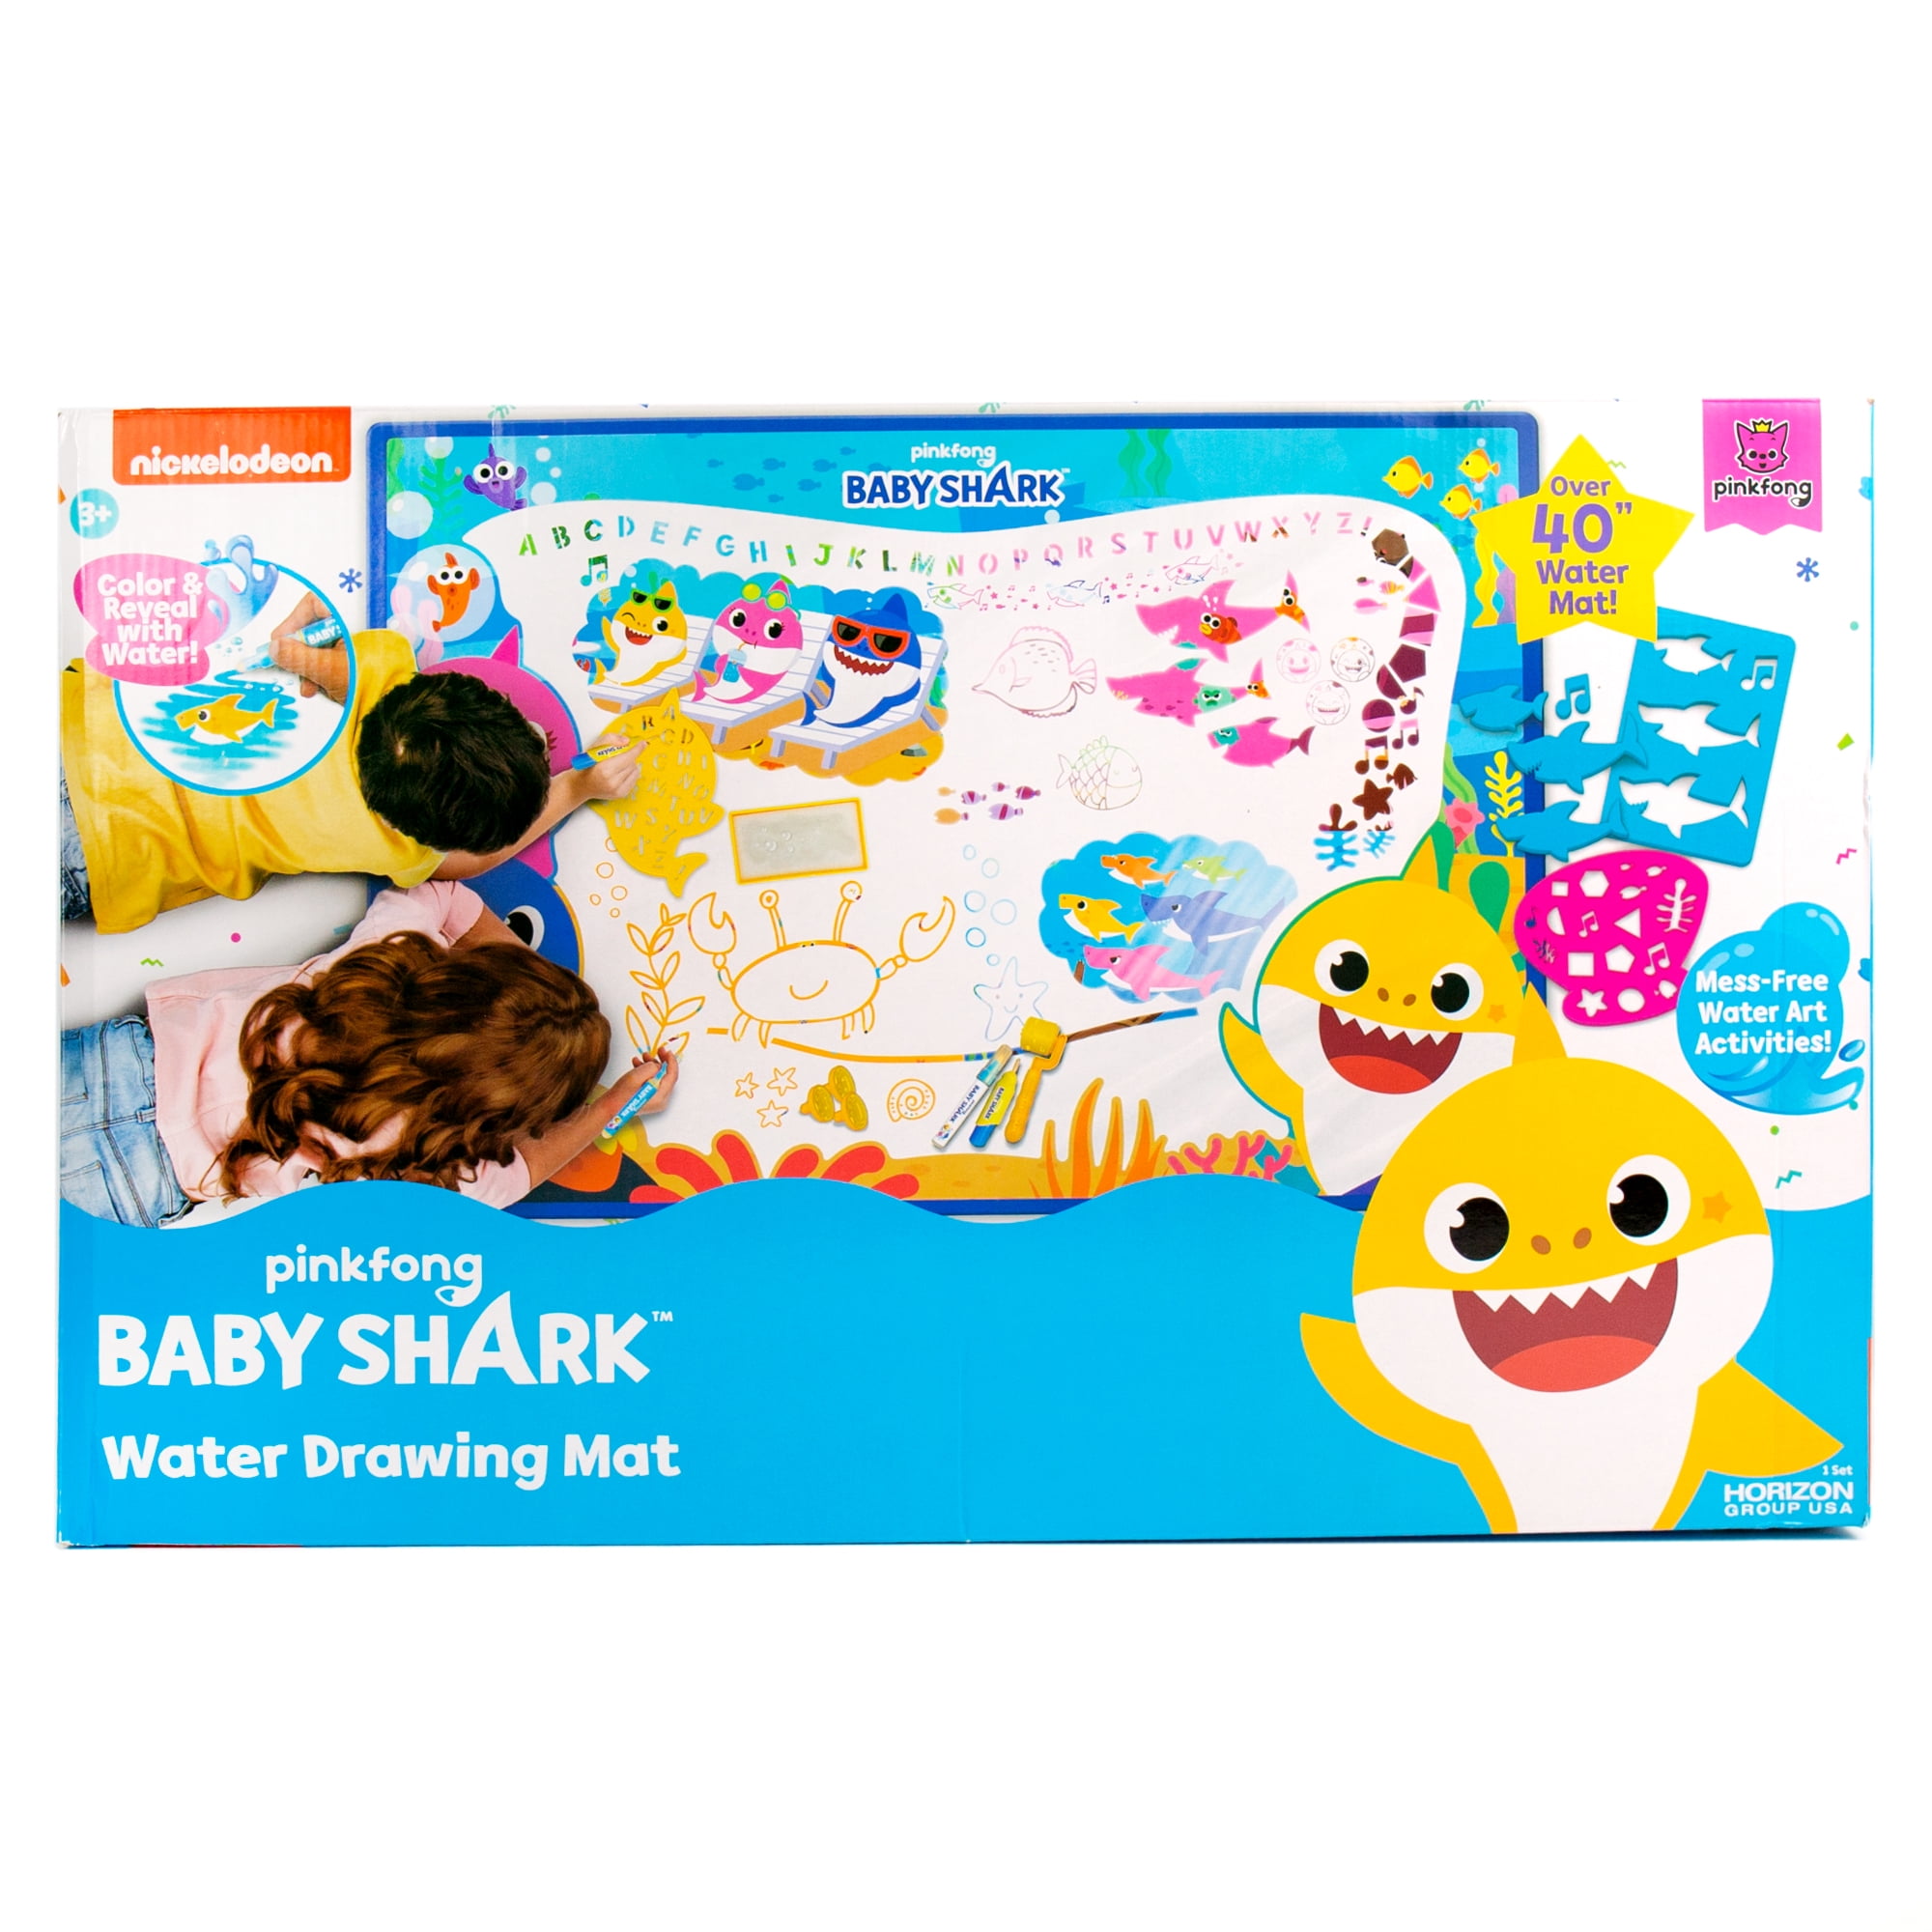 Pinkfong Baby Shark Brush Teeth Set Toothbrush& Toothpaste& Cup For Kids 3-5Y 